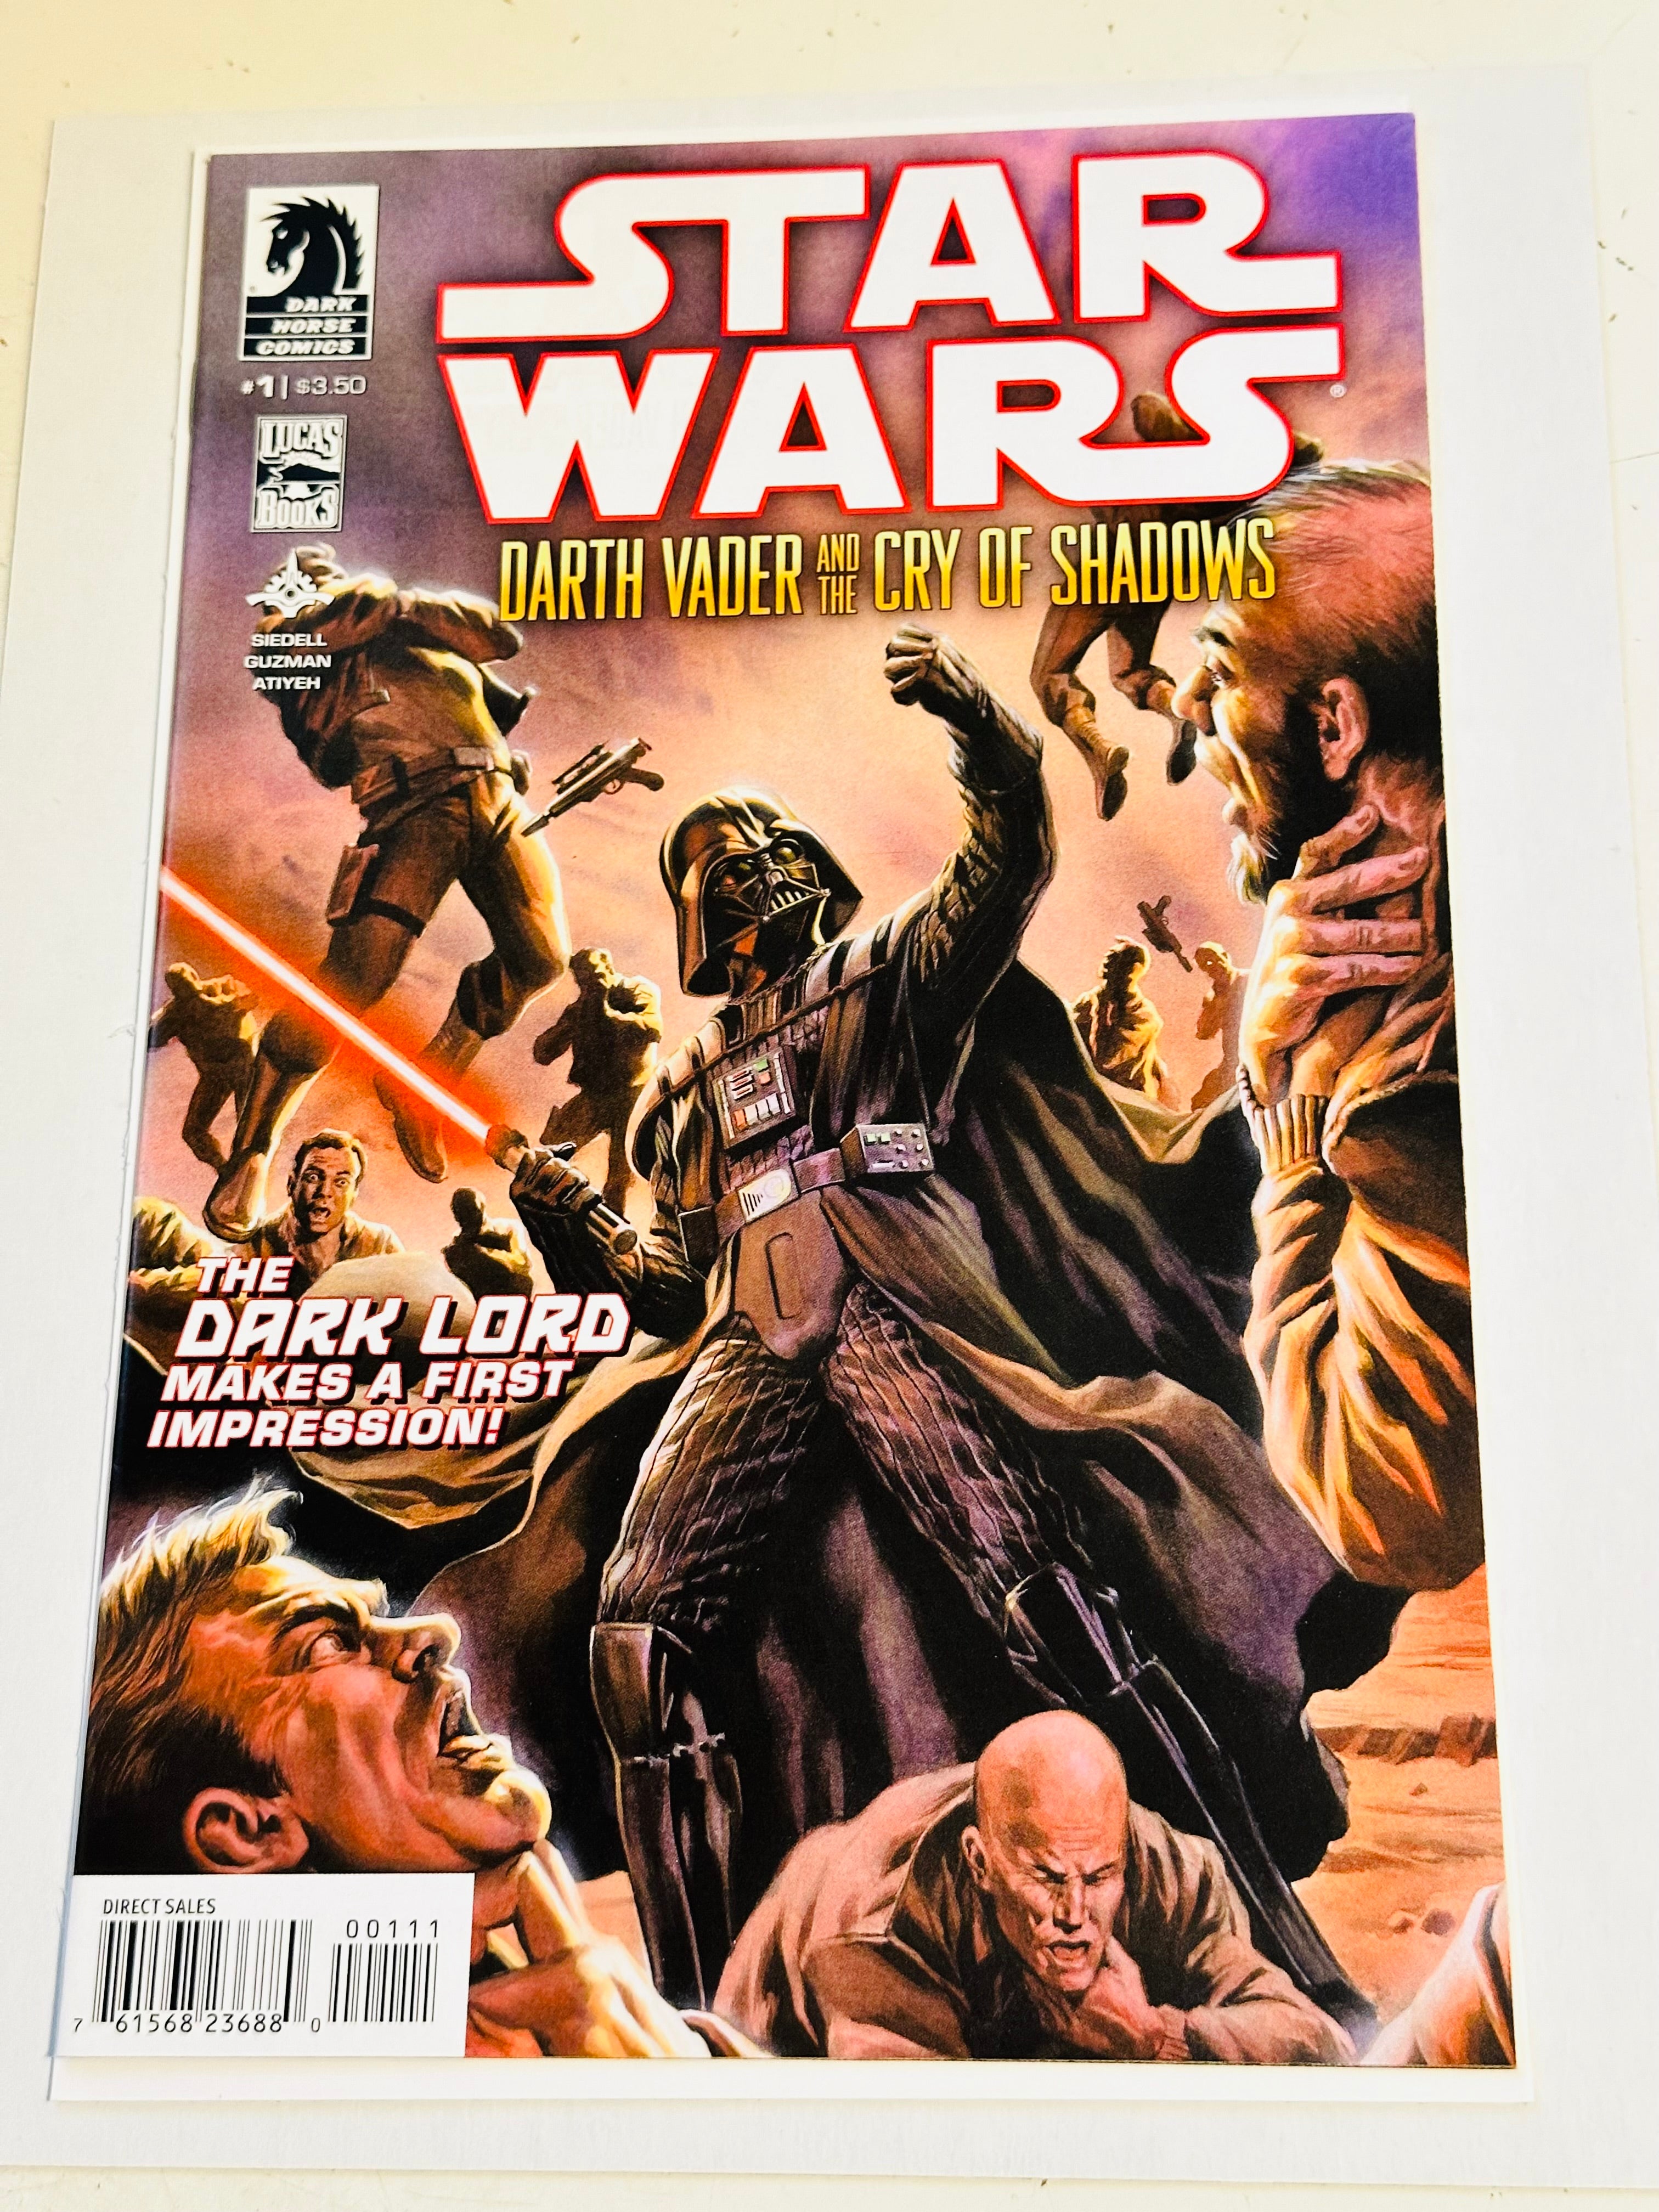 Star Wars Darth Vader in the cry of shadows high-grade condition number 1 comic book